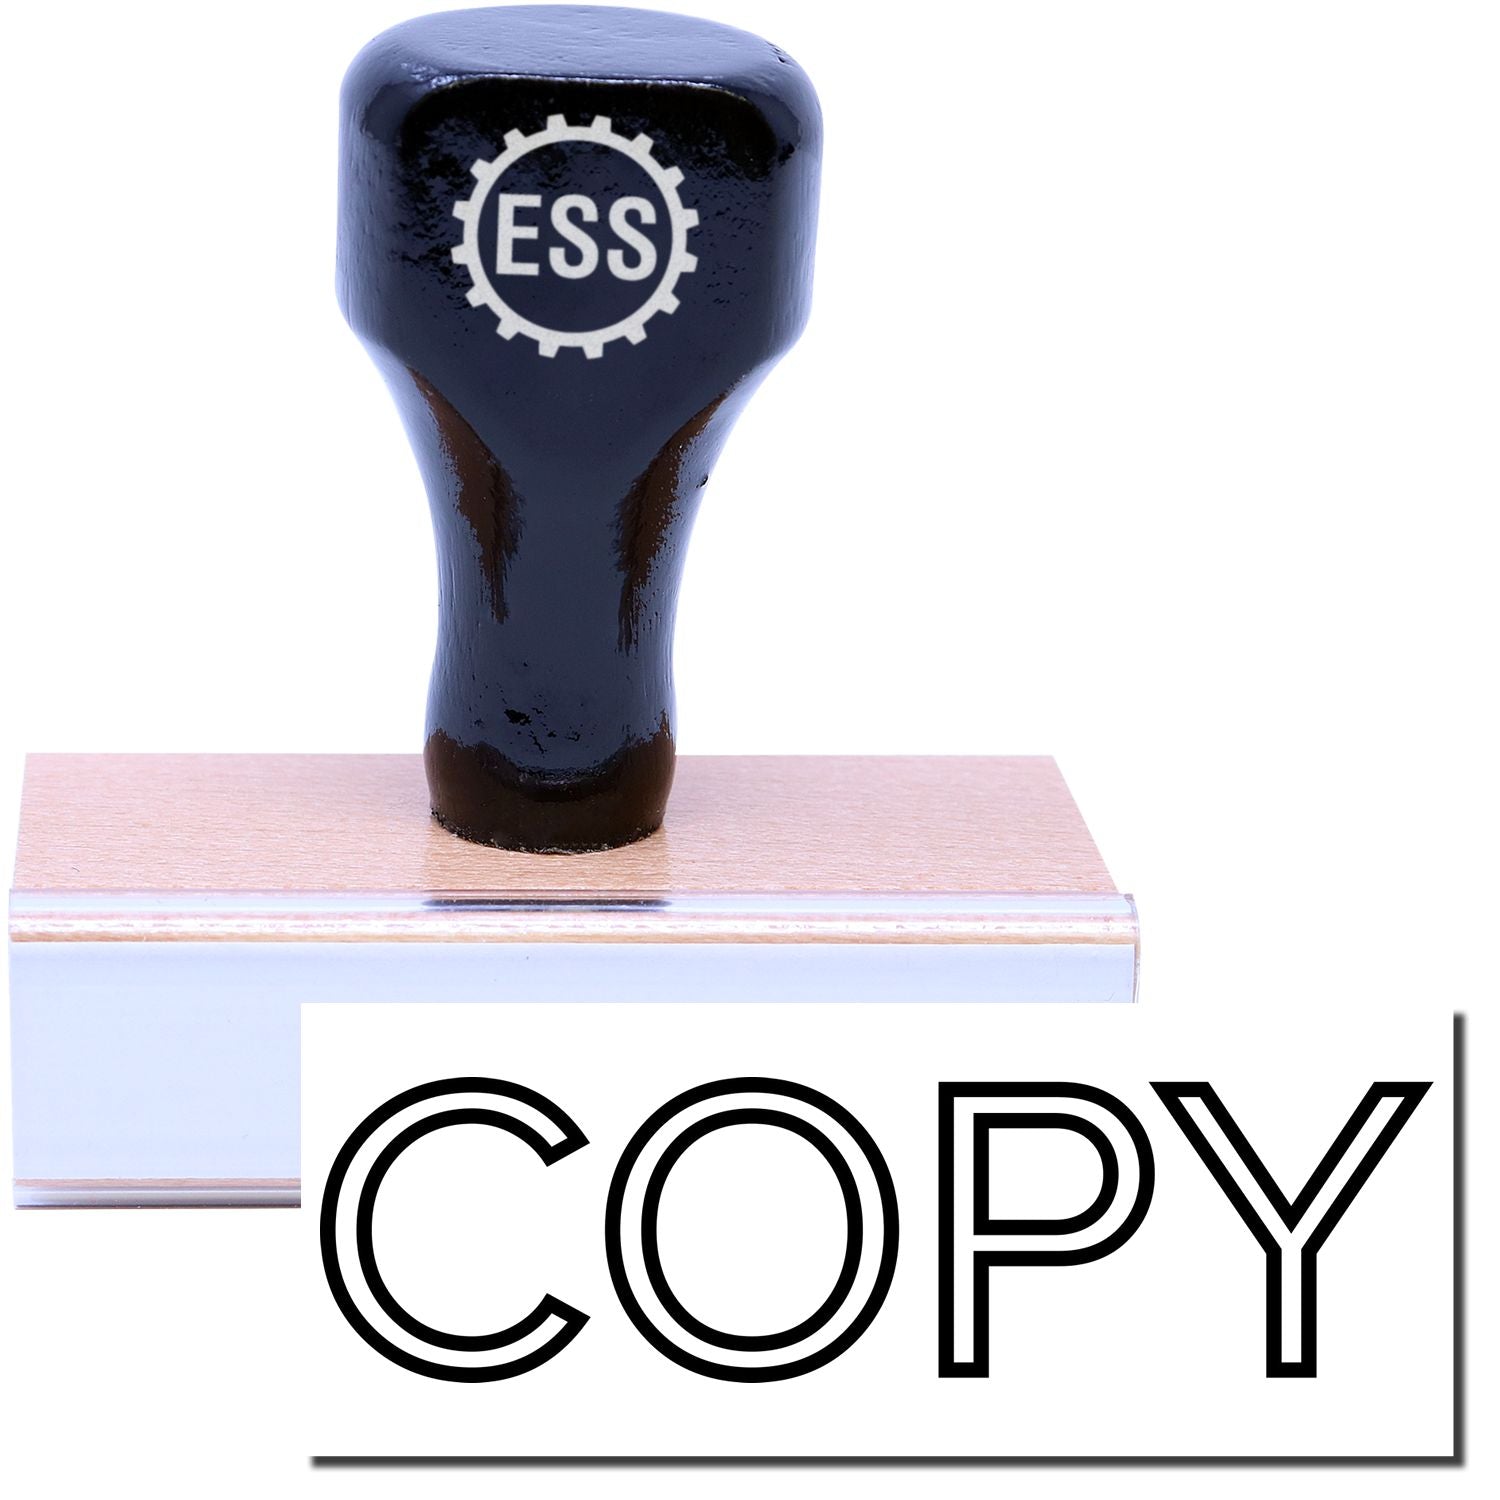 A stock office rubber stamp with a stamped image showing how the text "COPY" in an outline font is displayed after stamping.